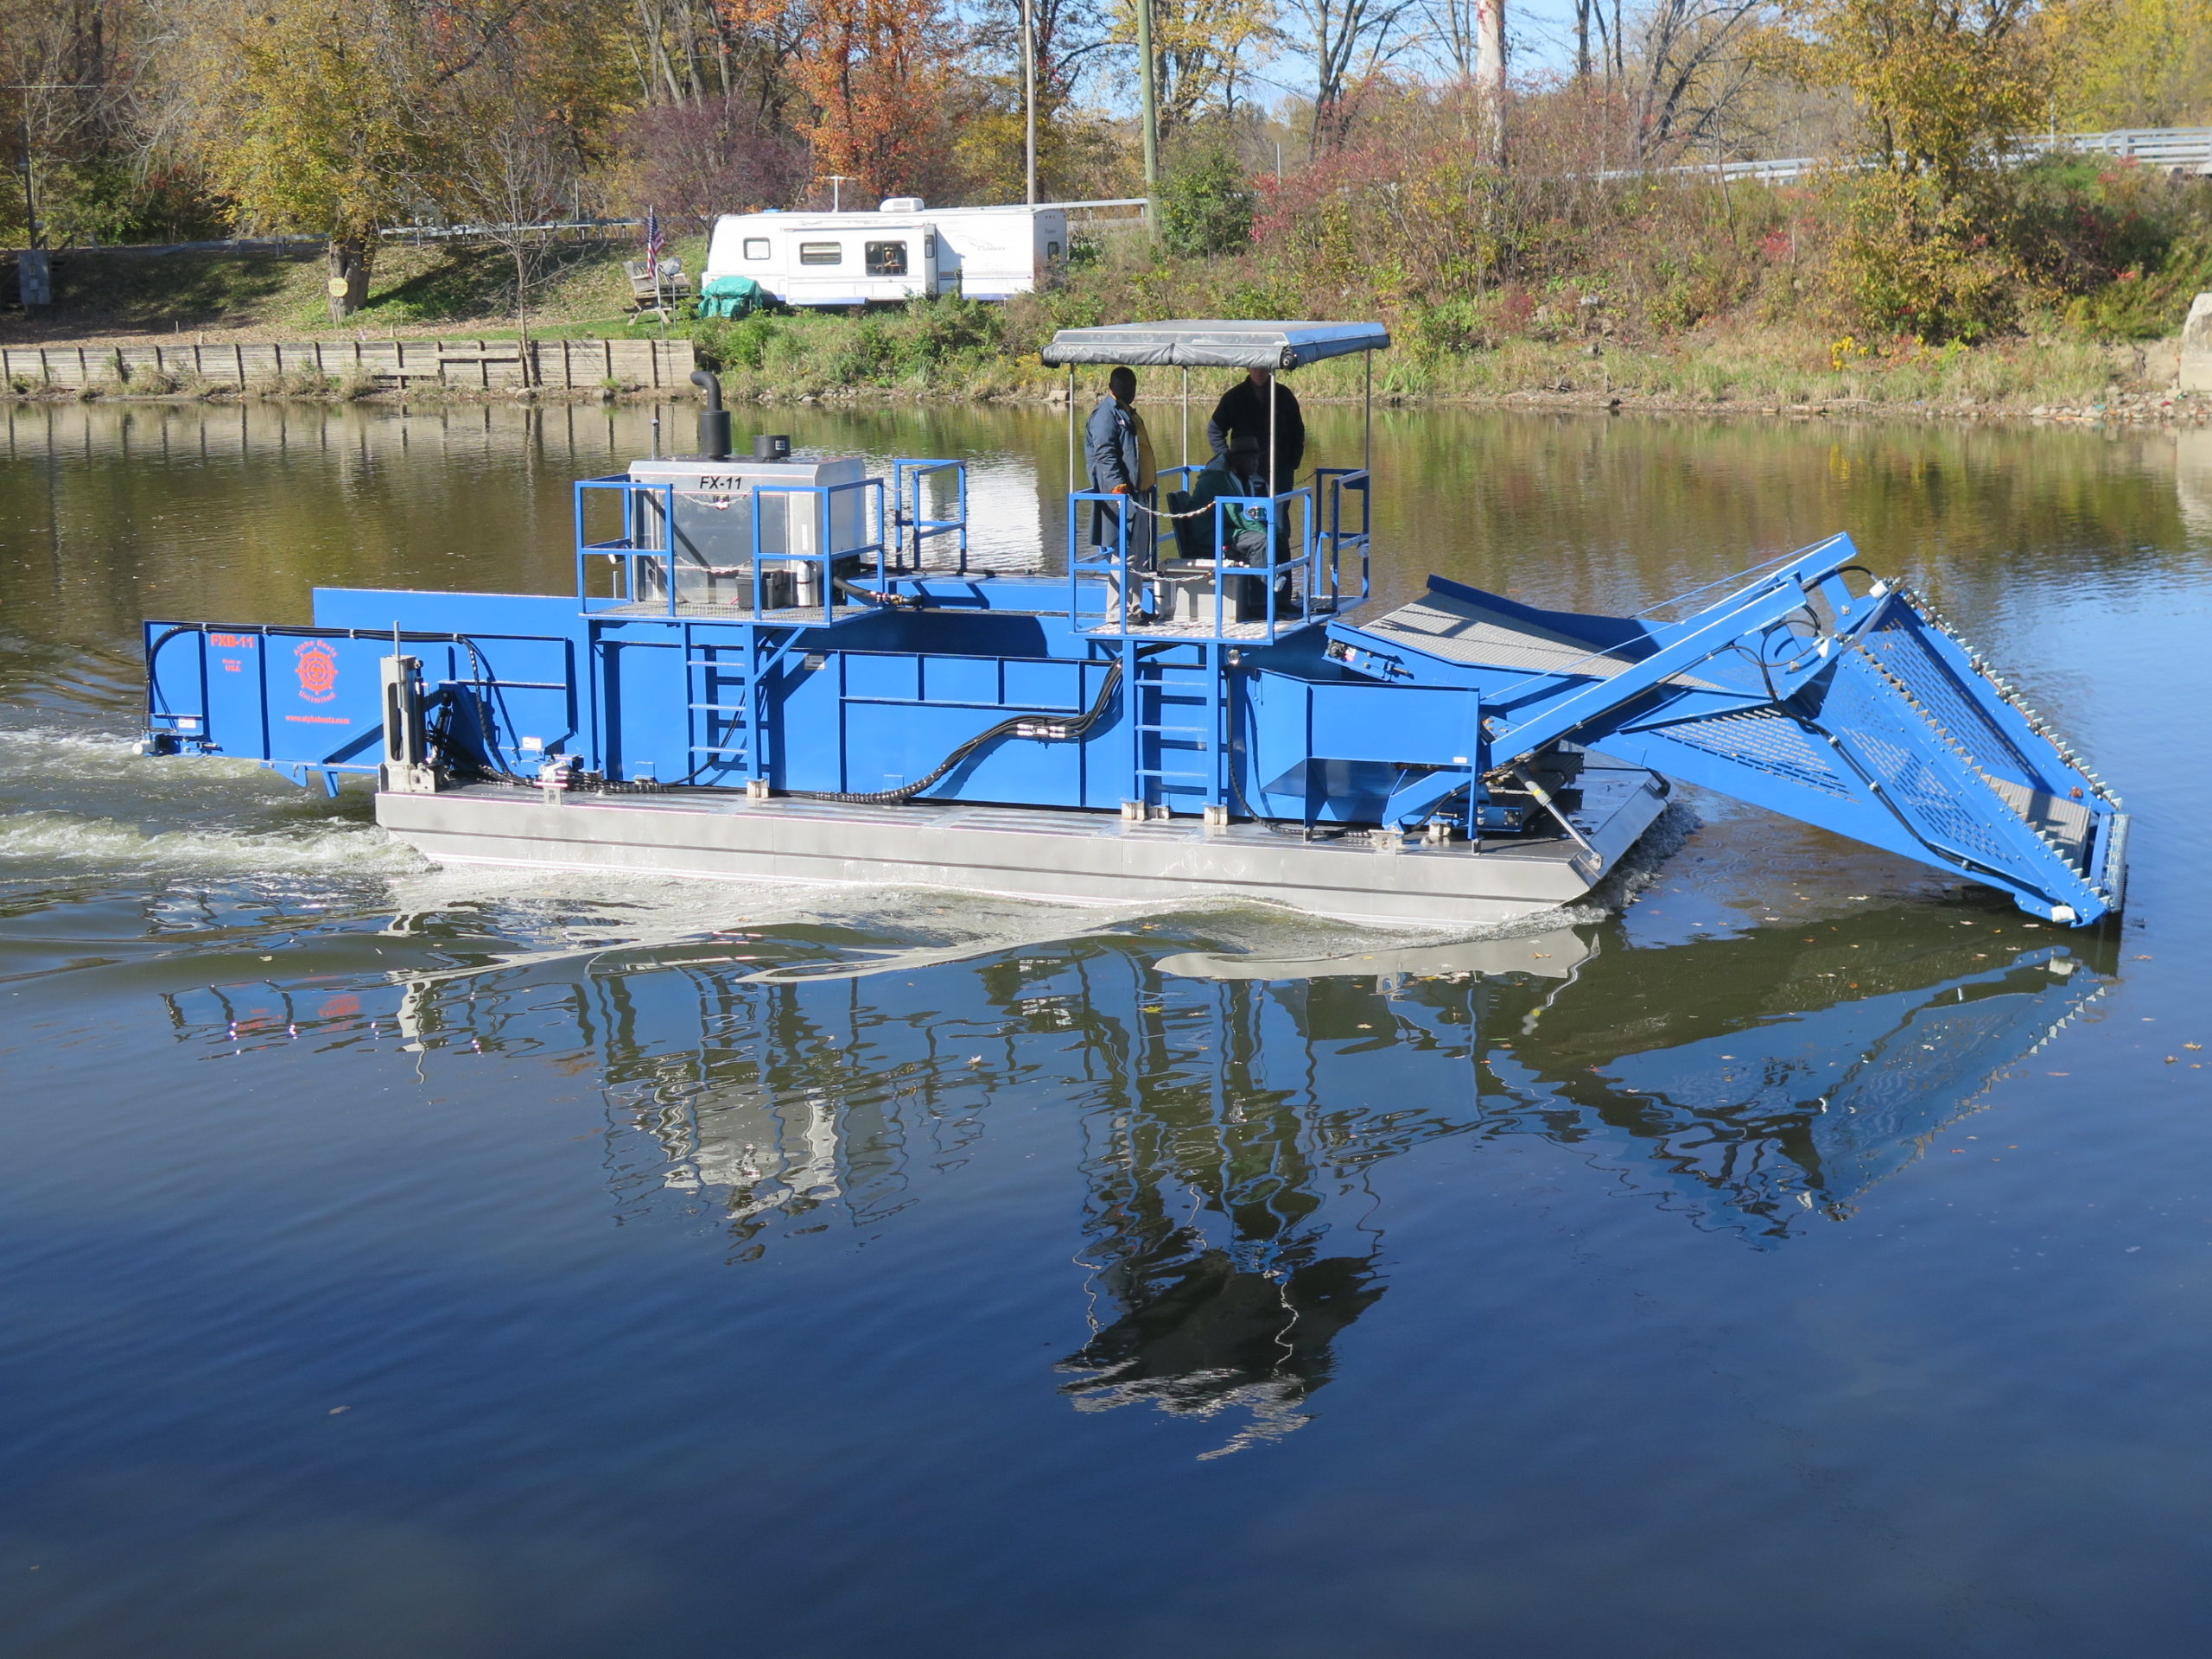 Alphaboats FX-11 Waterweed Harvester working on New York's Erie Canal